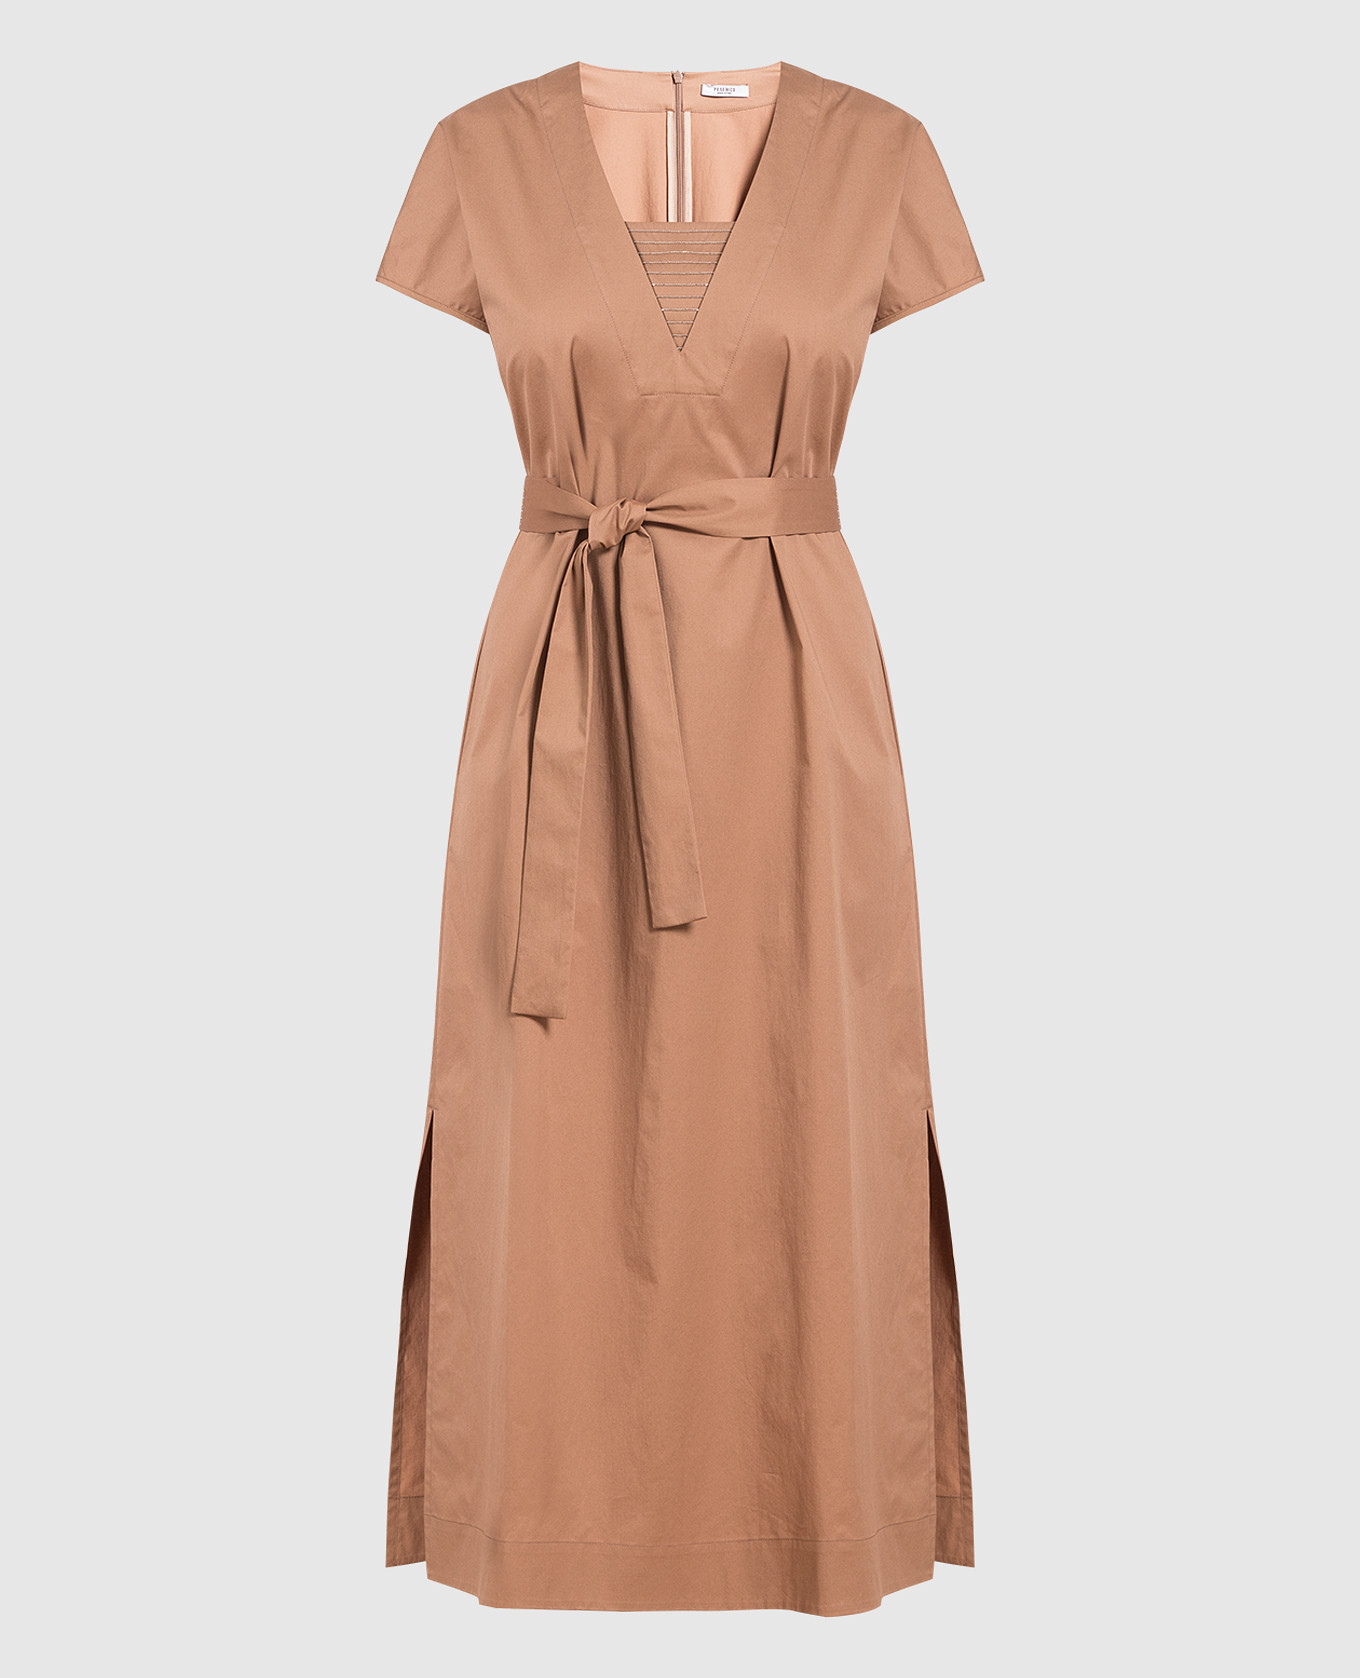 Brown dress with monil chain